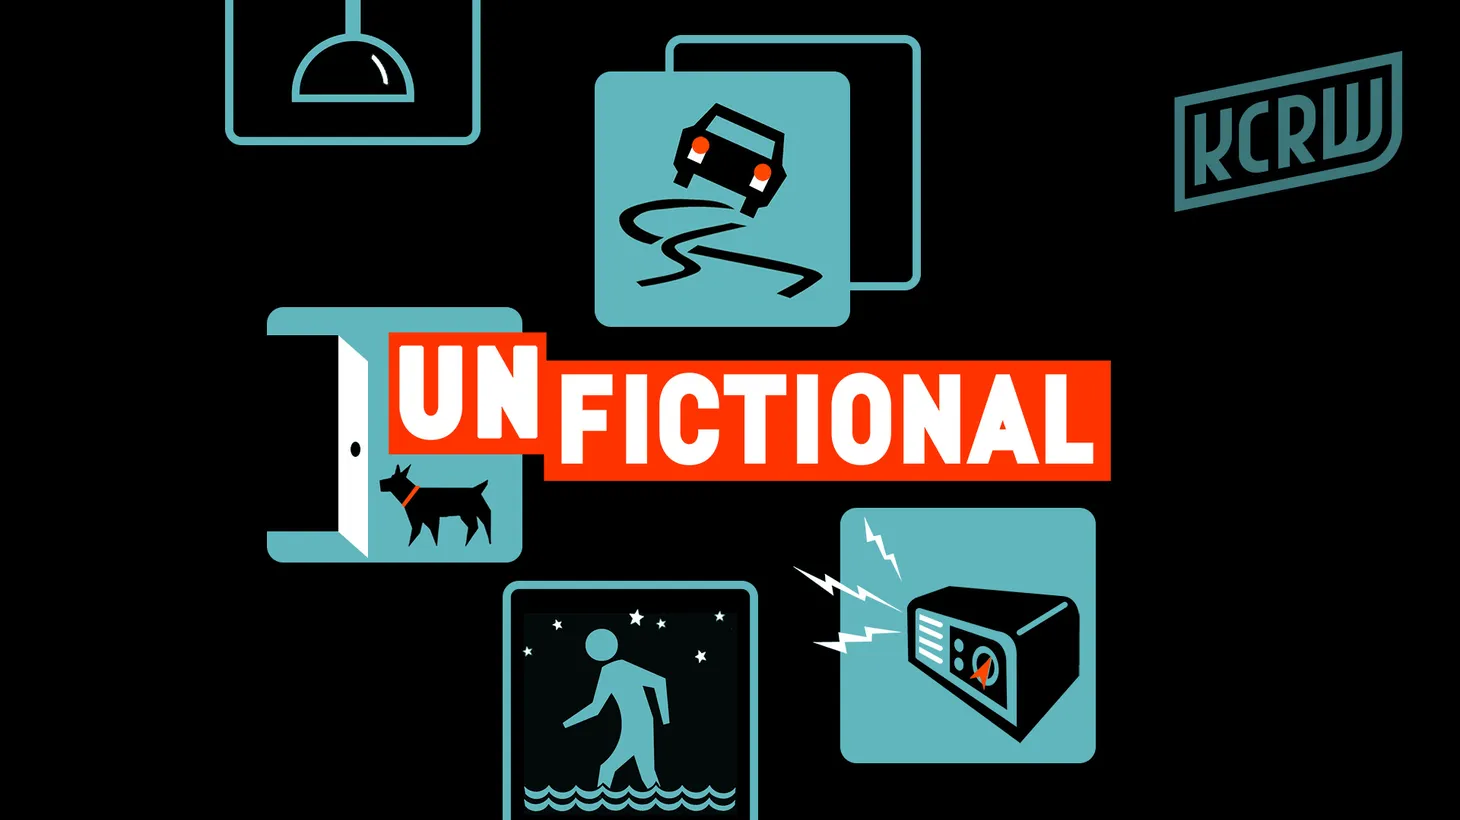 On this special holiday episode of UnFictional we share past stories of gifts, god and awkward family visits.